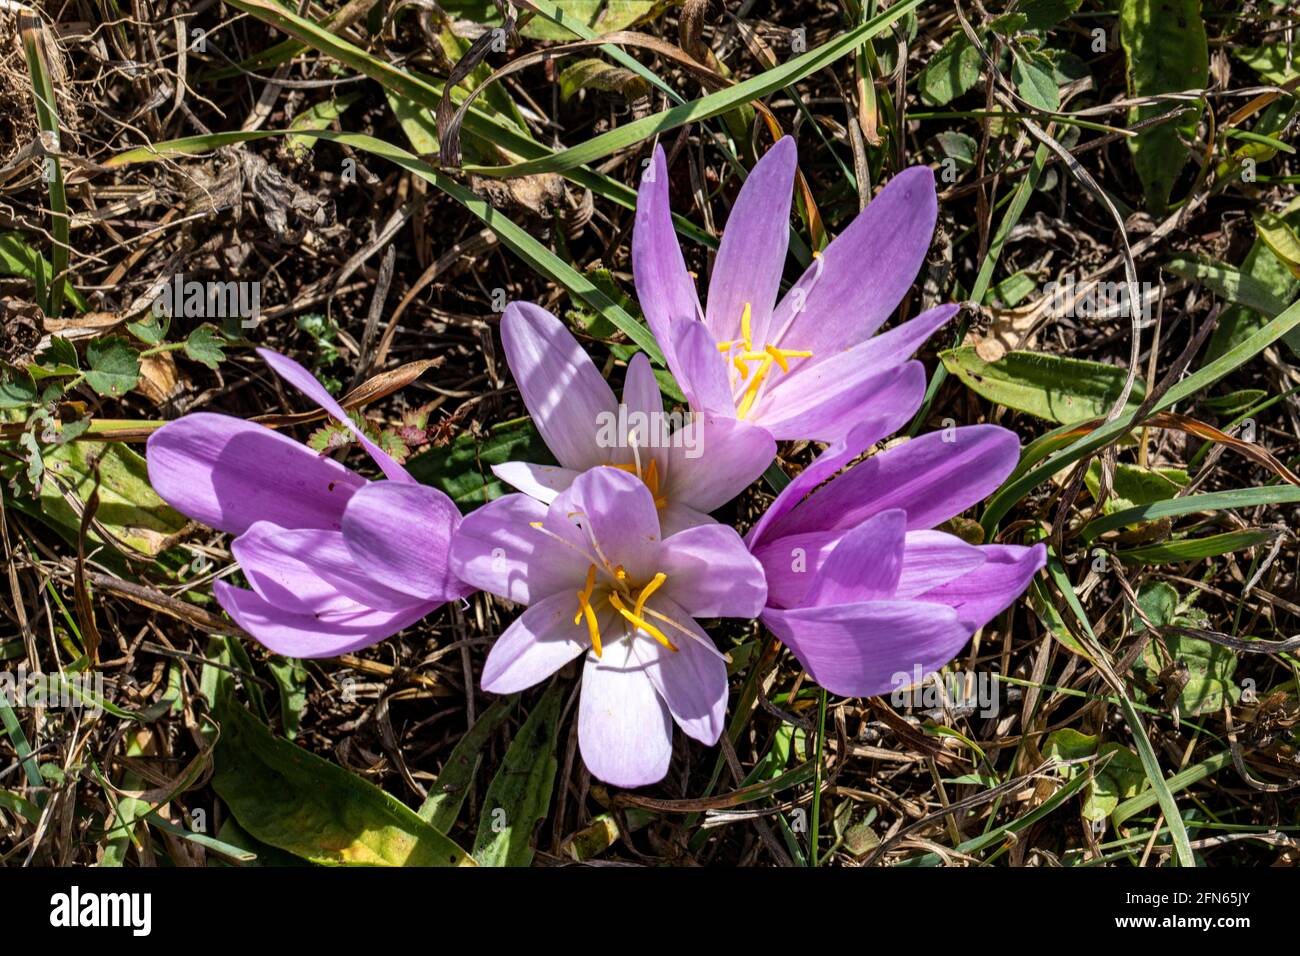 This close up photo of lilac colored Crocus flowers reflects an amazing scenery. Crocus flower is from the Iridaceae family and native the Alps, south Stock Photo